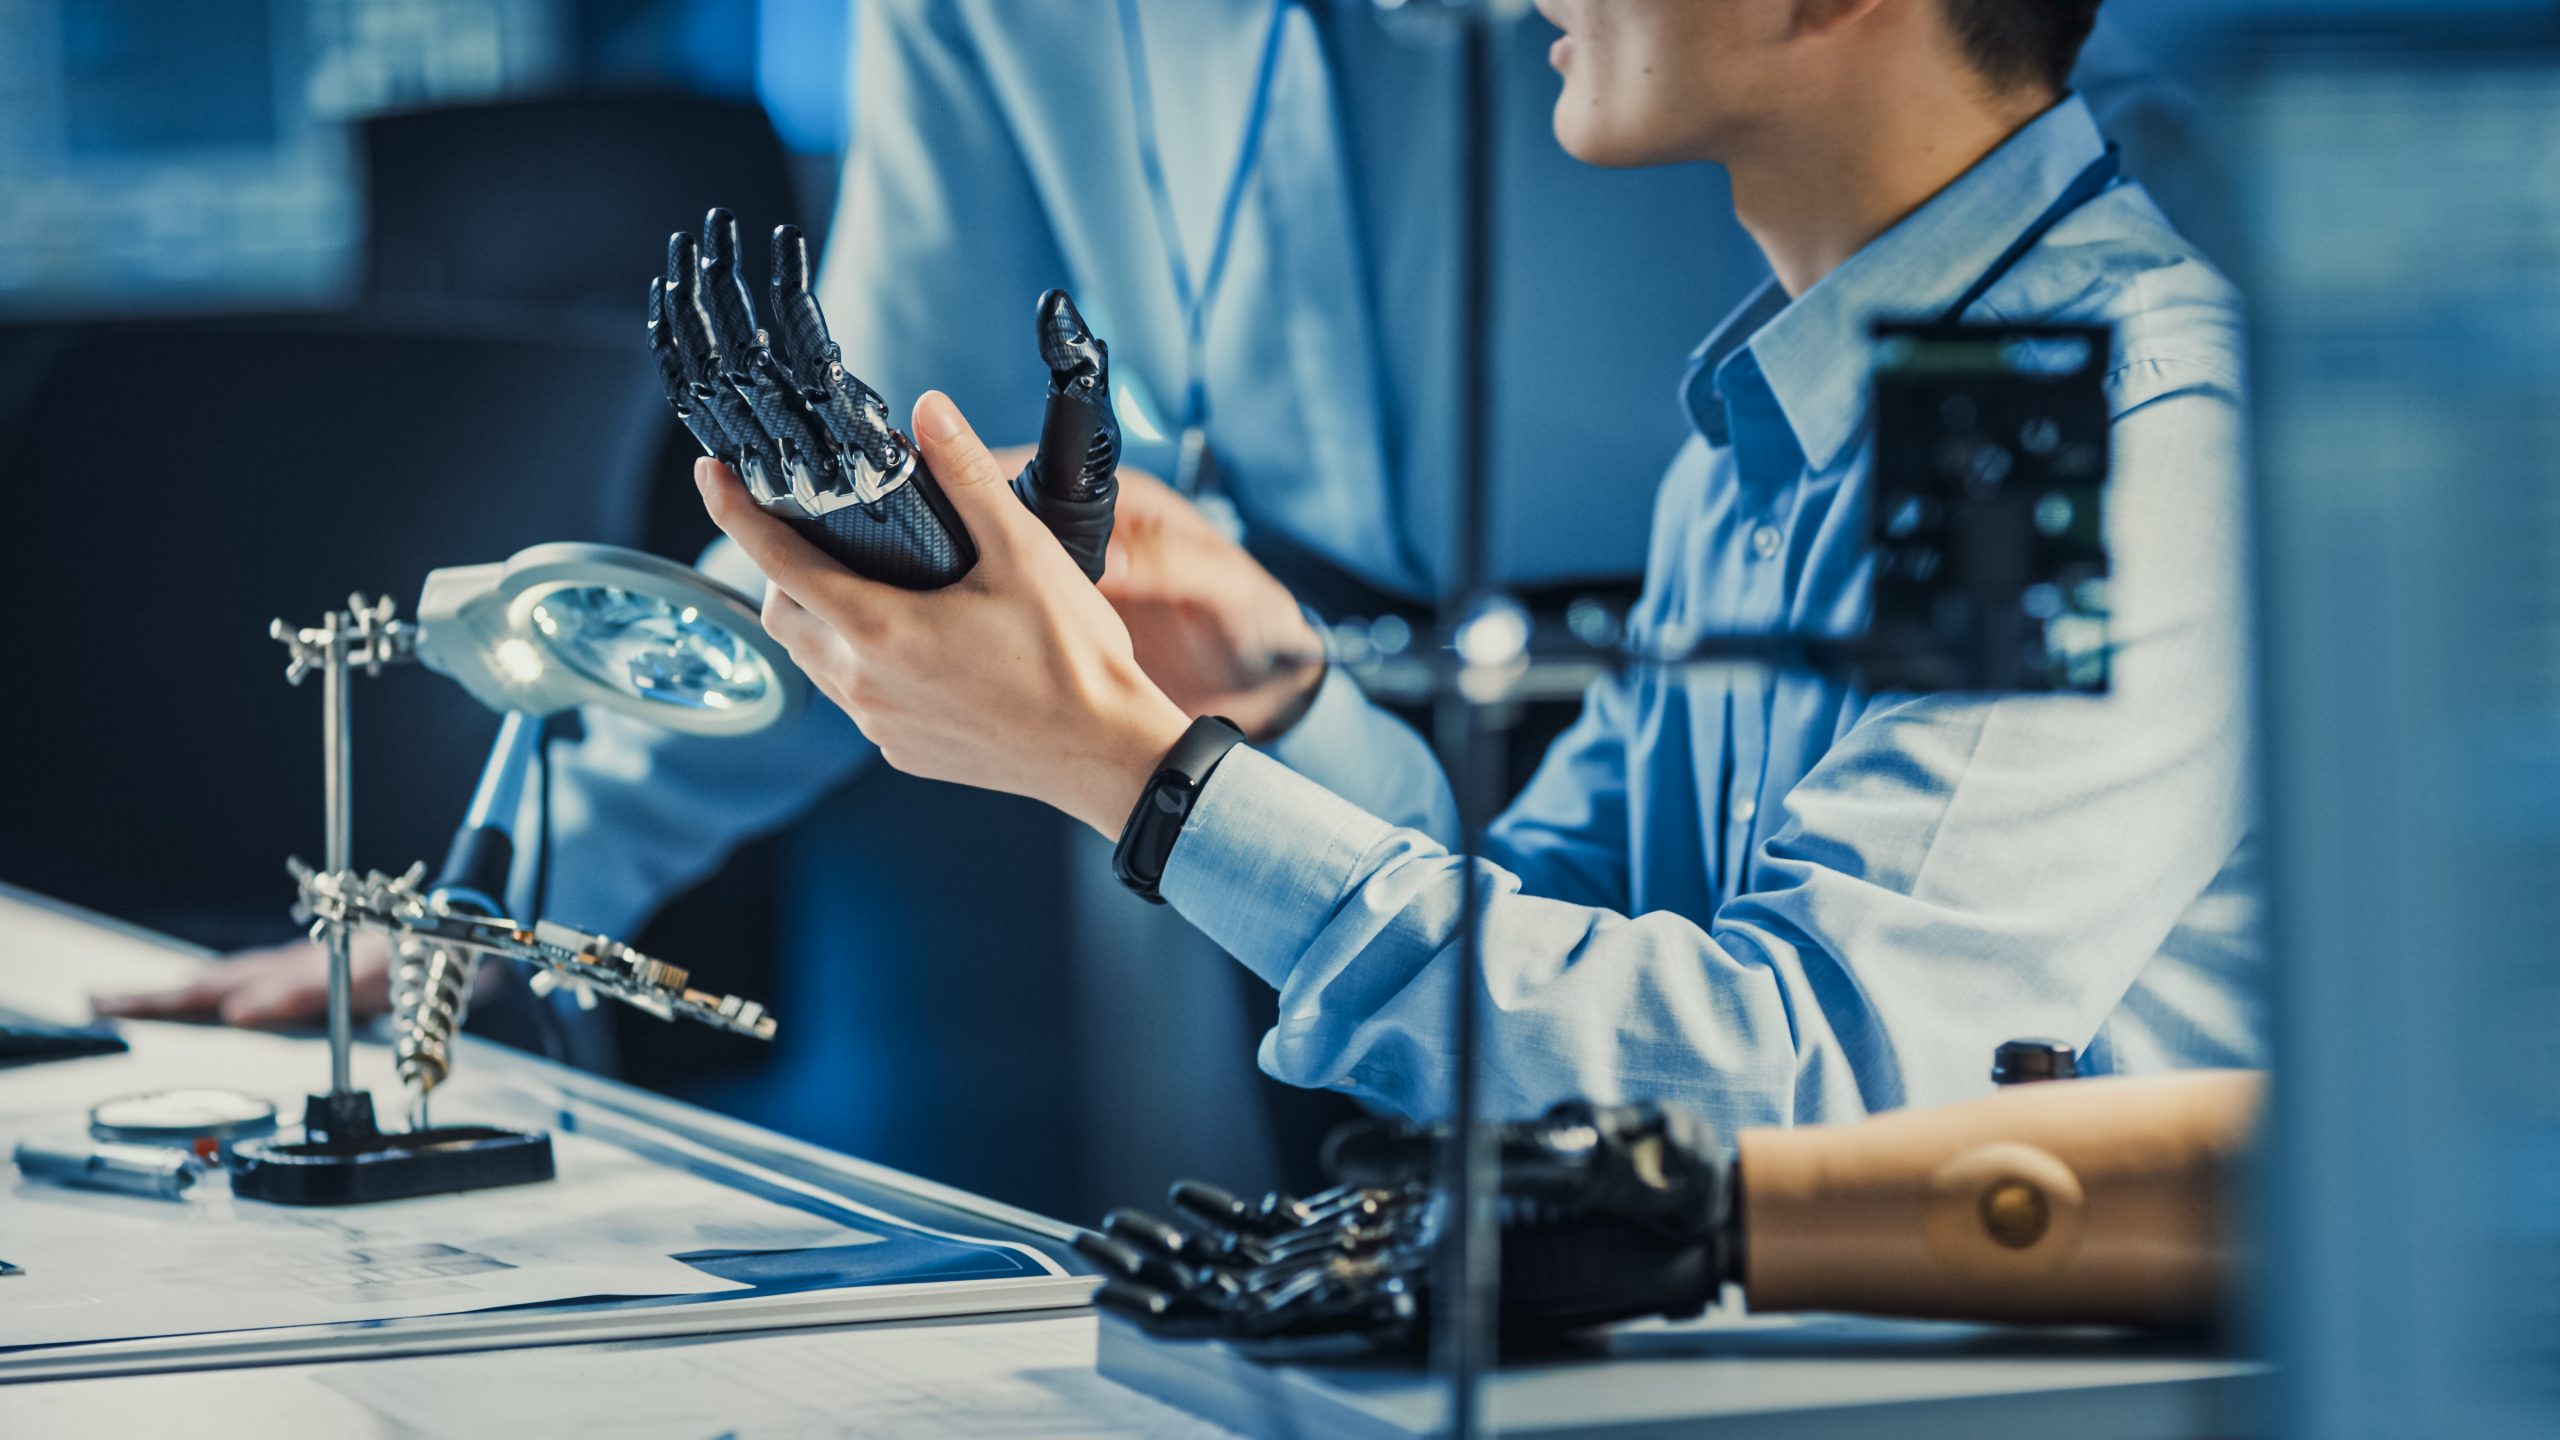 Close up photo of two researchers testing a Prosthetic hand in a lab